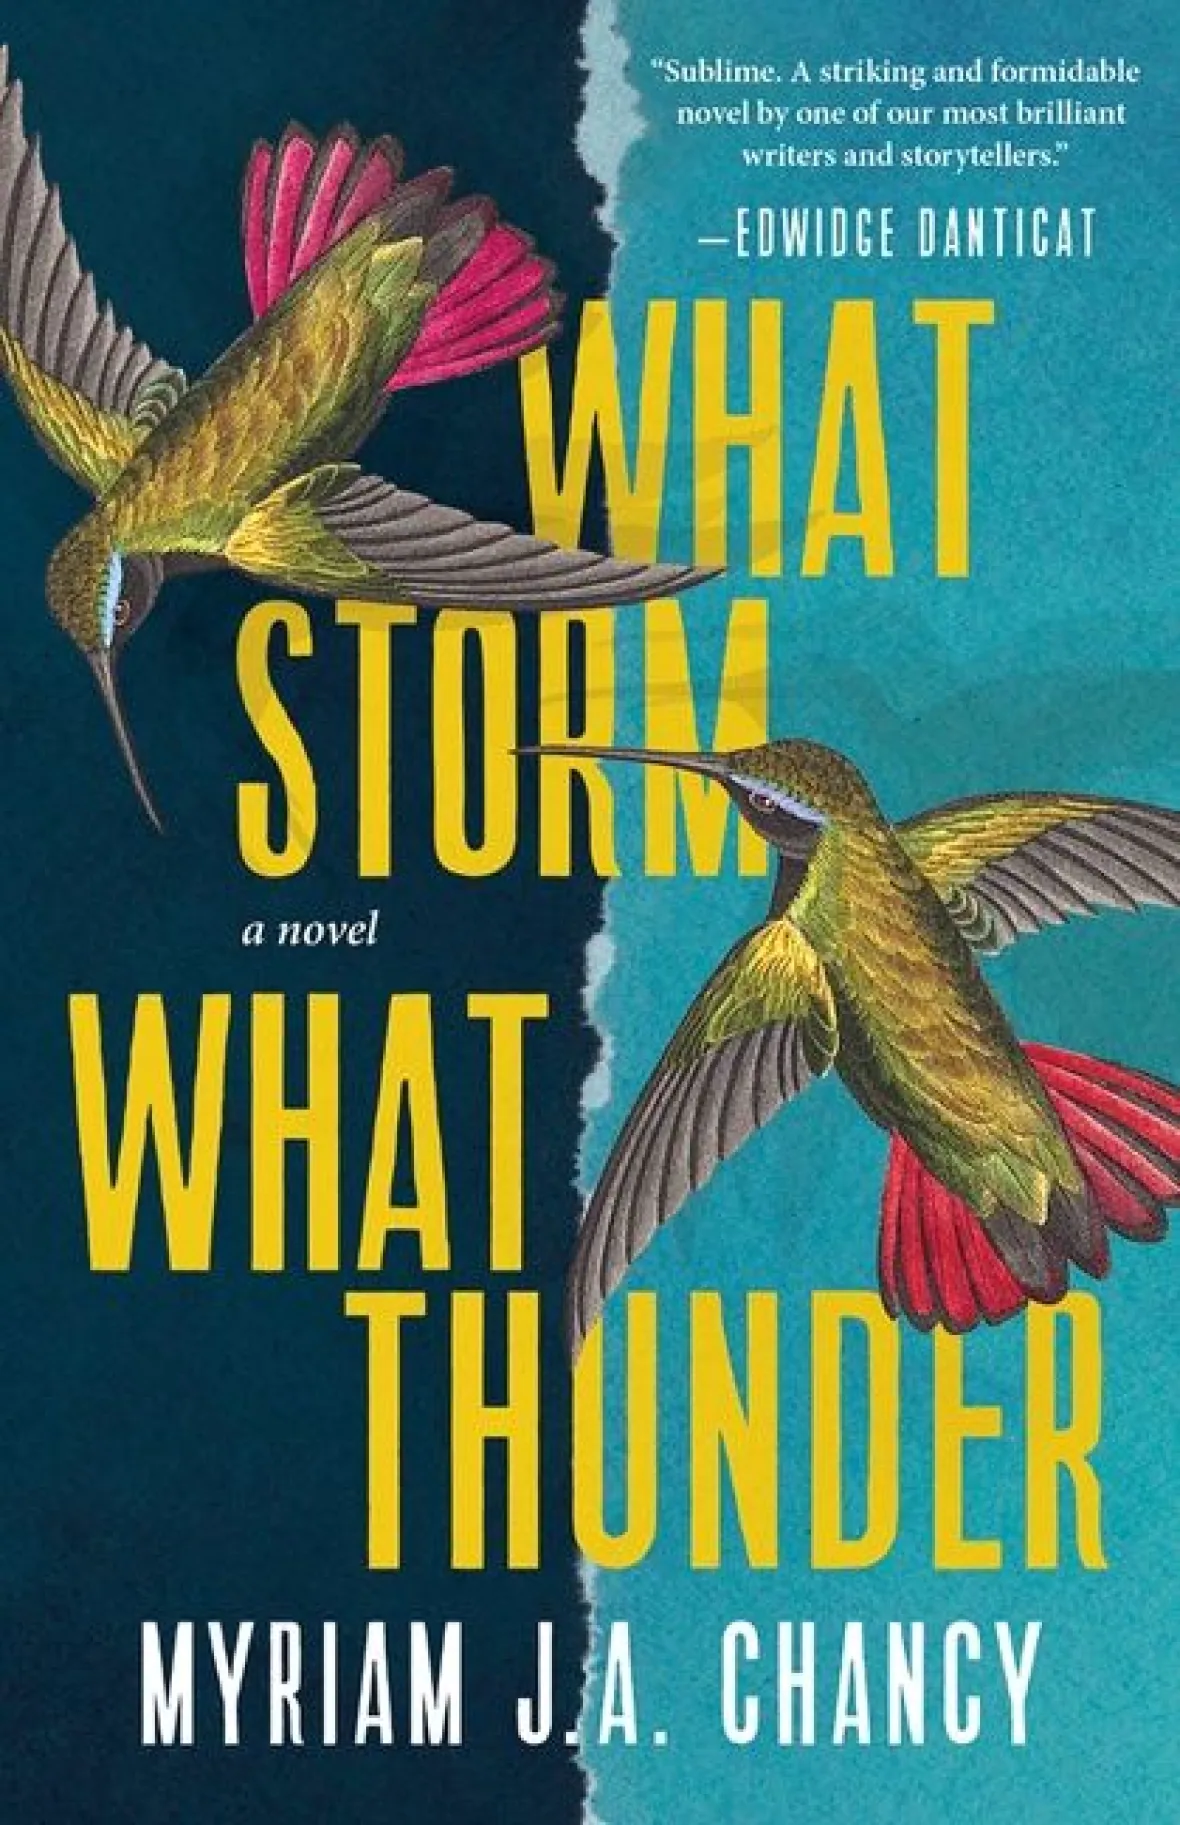 Cover image for Myriam J. Chancy's novel, WHAT STORM, WHAT THUNDER, showing two hummungbirds against a blue background.